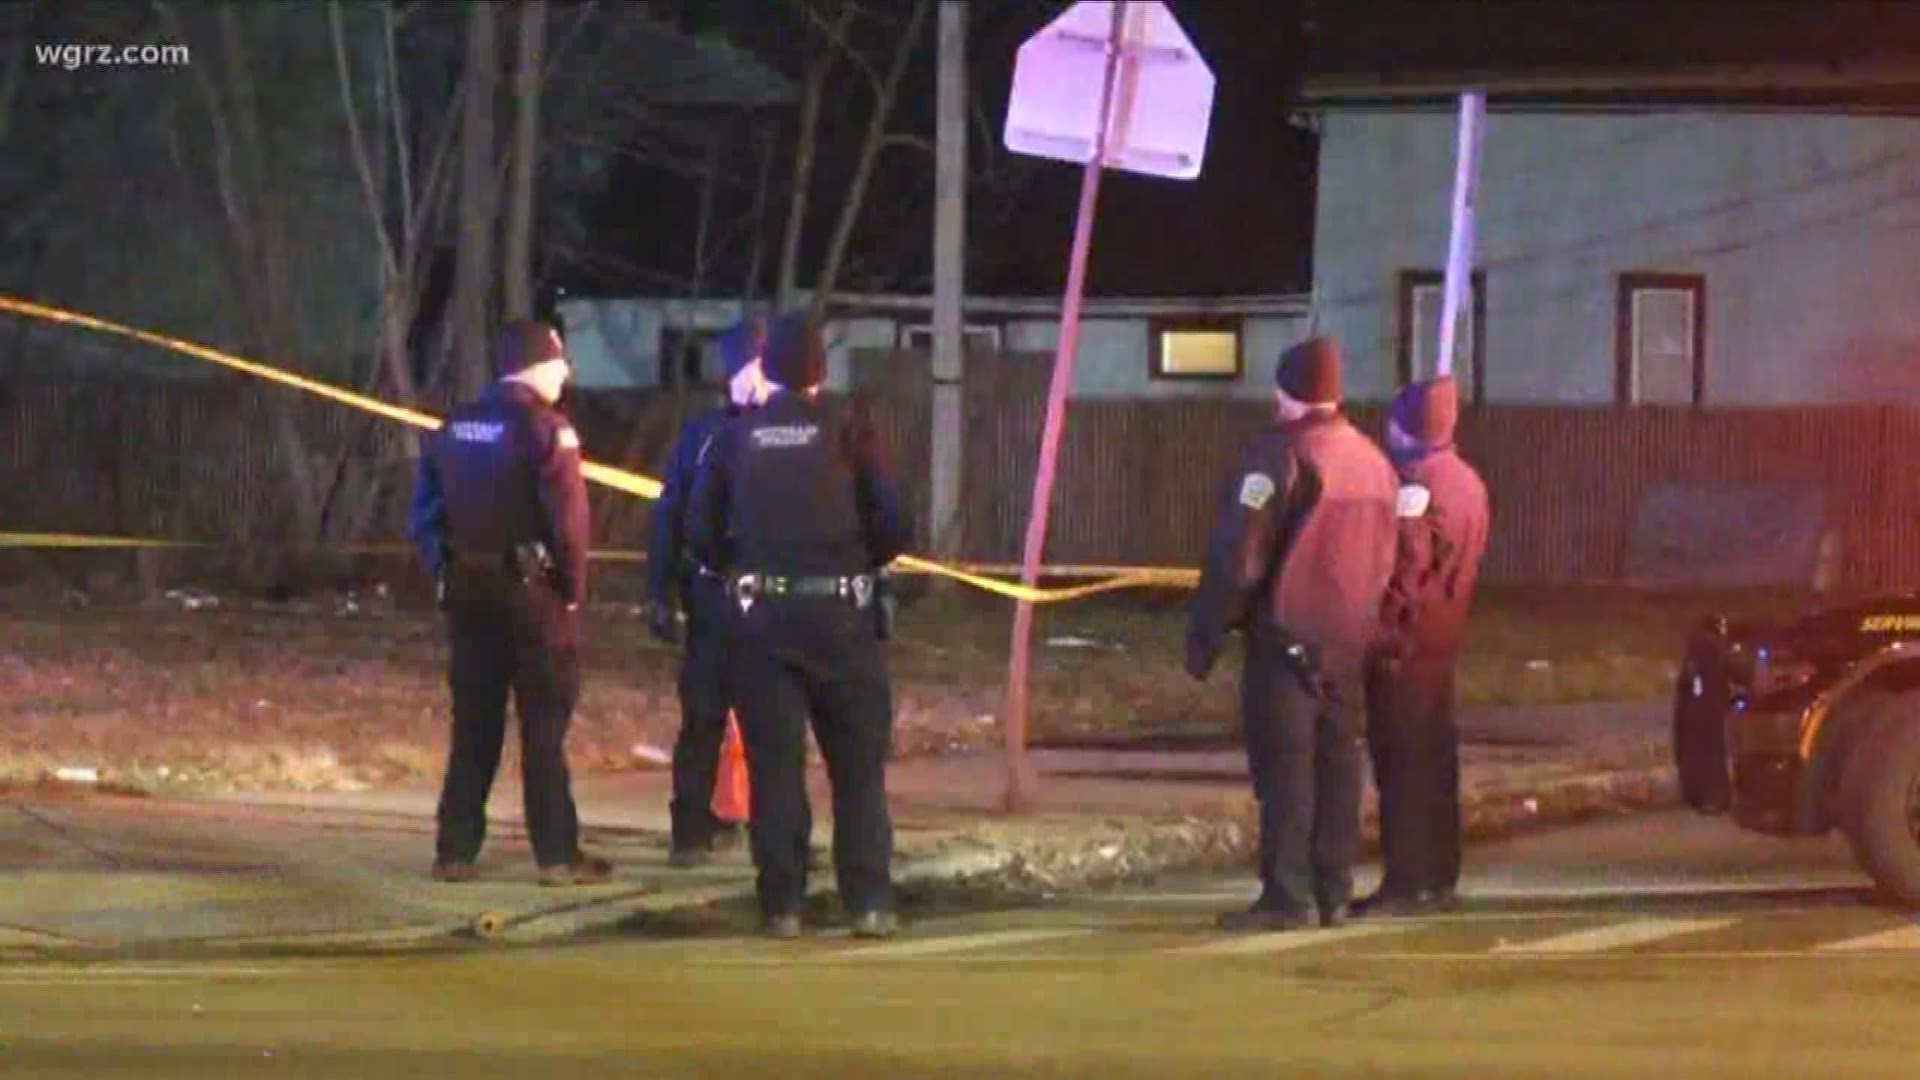 A man was shot on Broadway near Peck and Krupp streets in Buffalo.